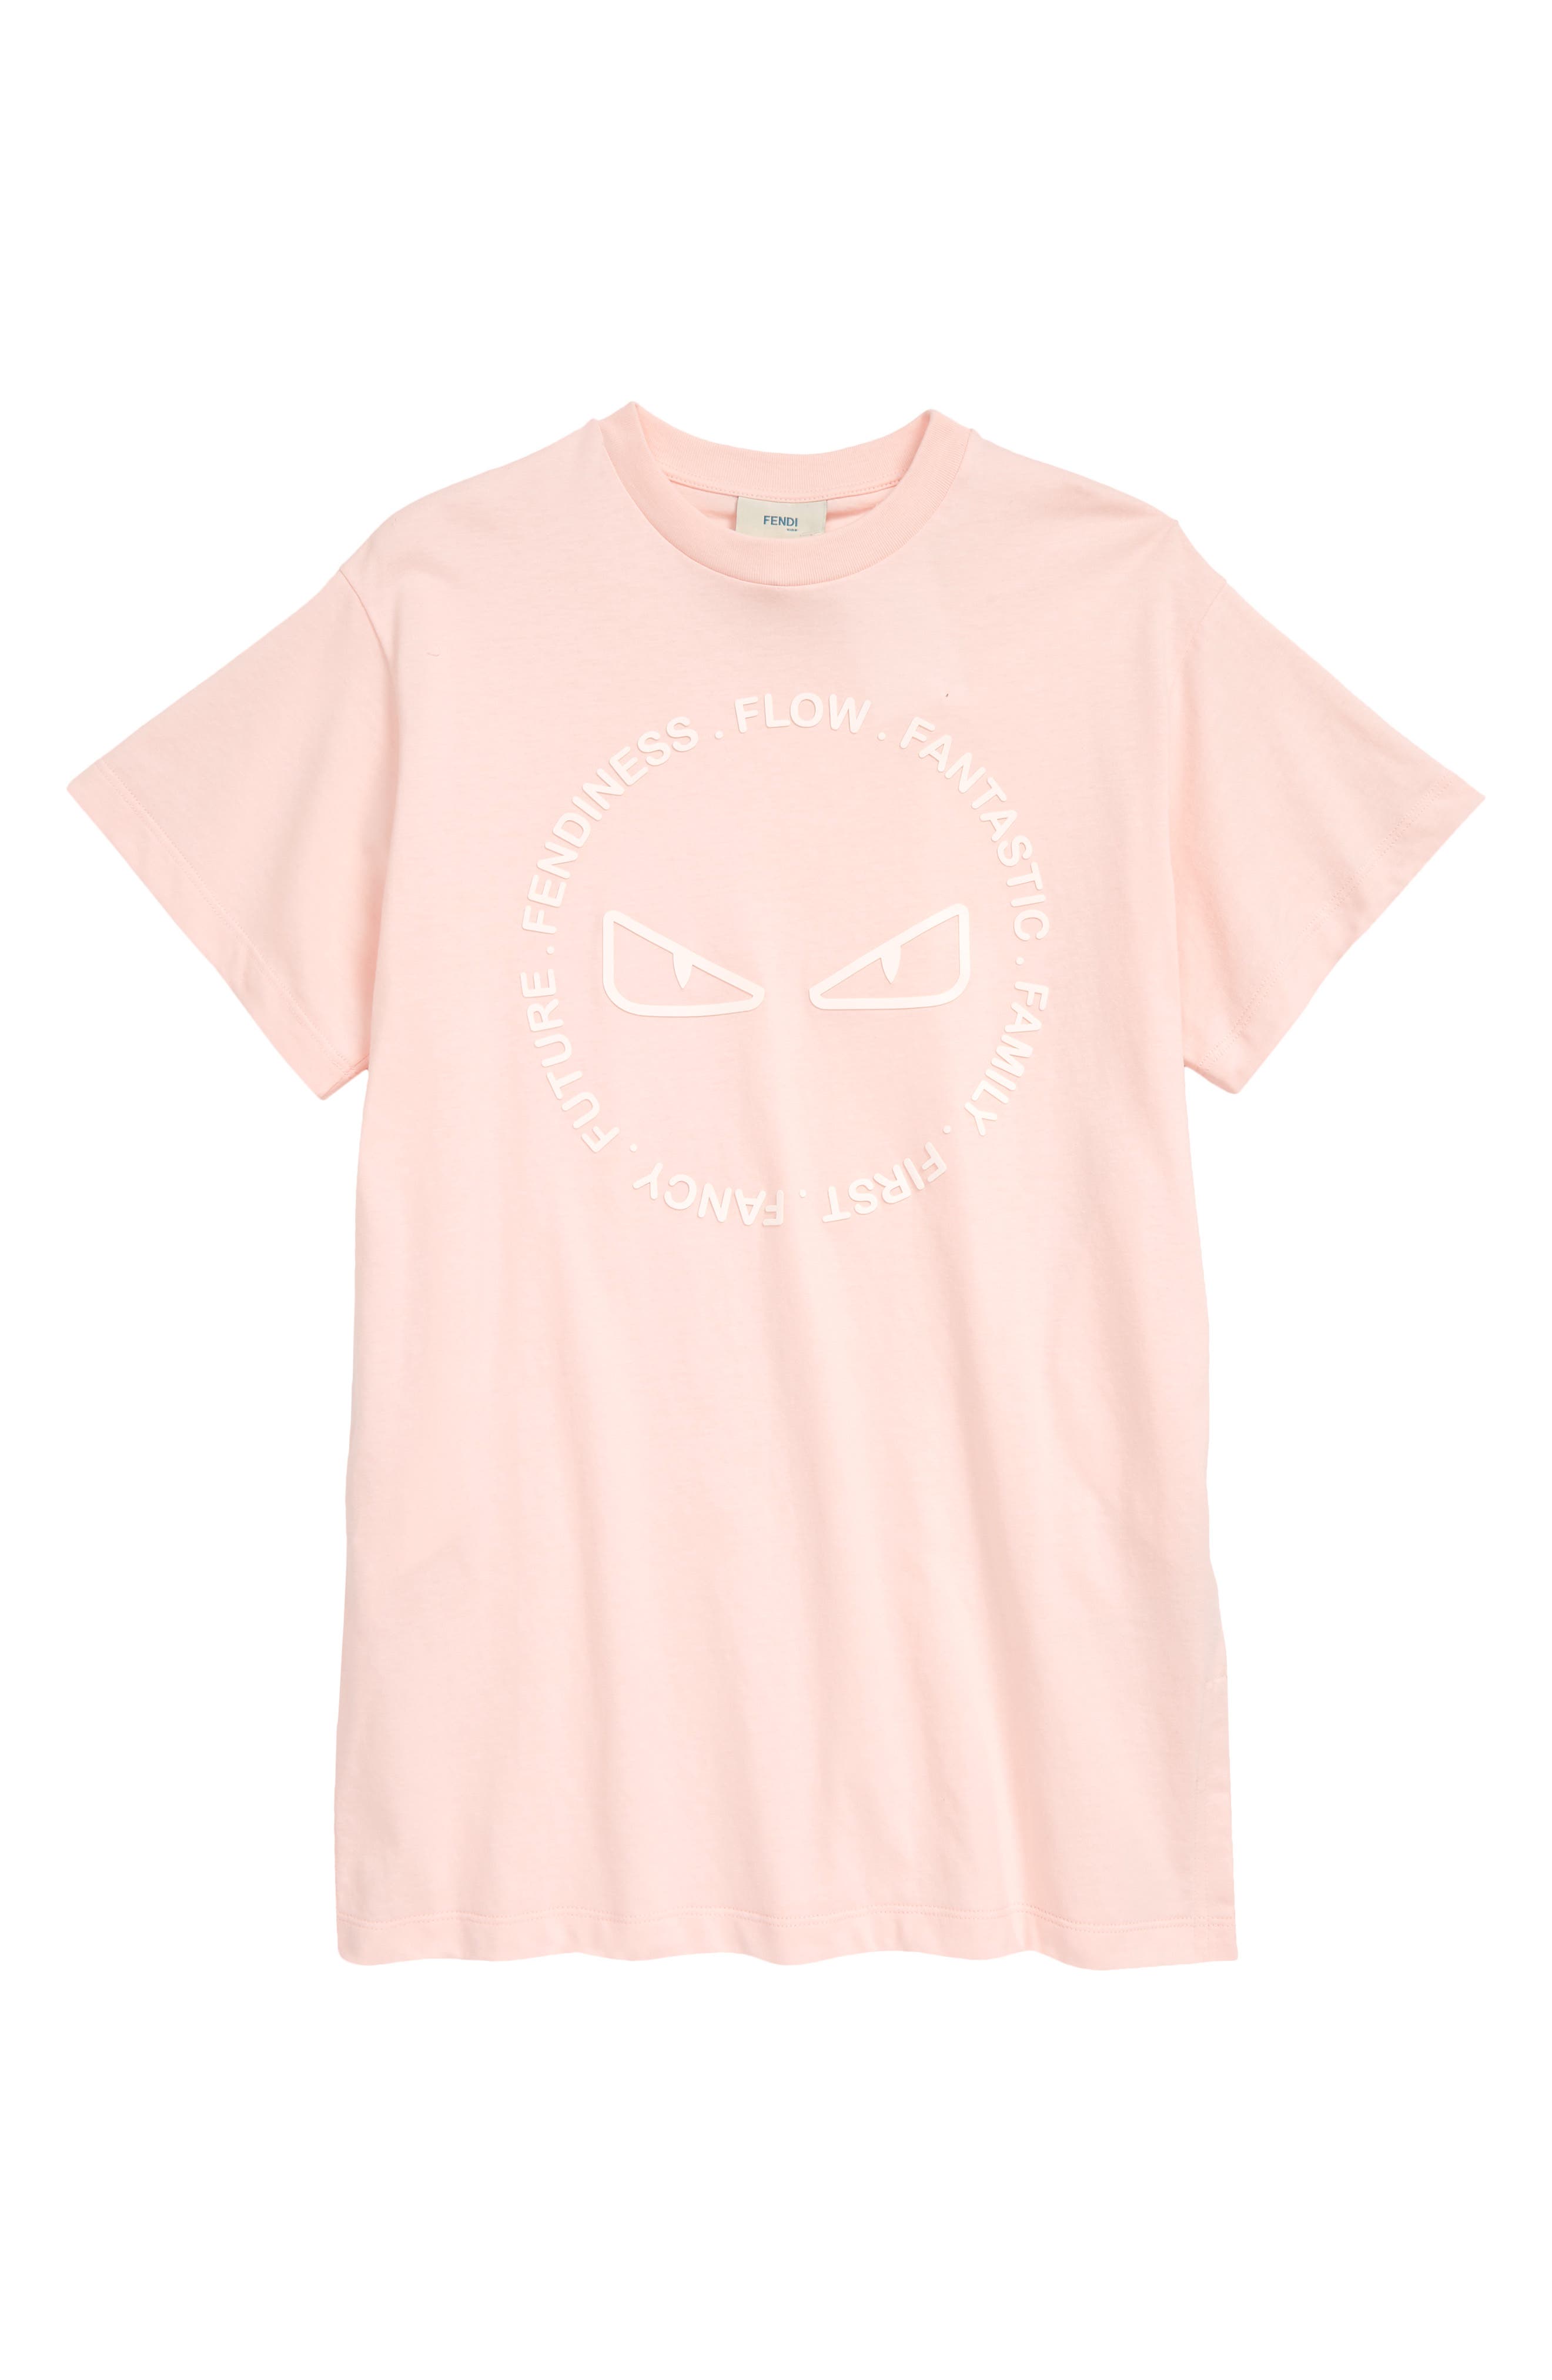 Kids' Fendiness Eyes Graphic Tee in Pink at Nordstrom, Size 4Y Us